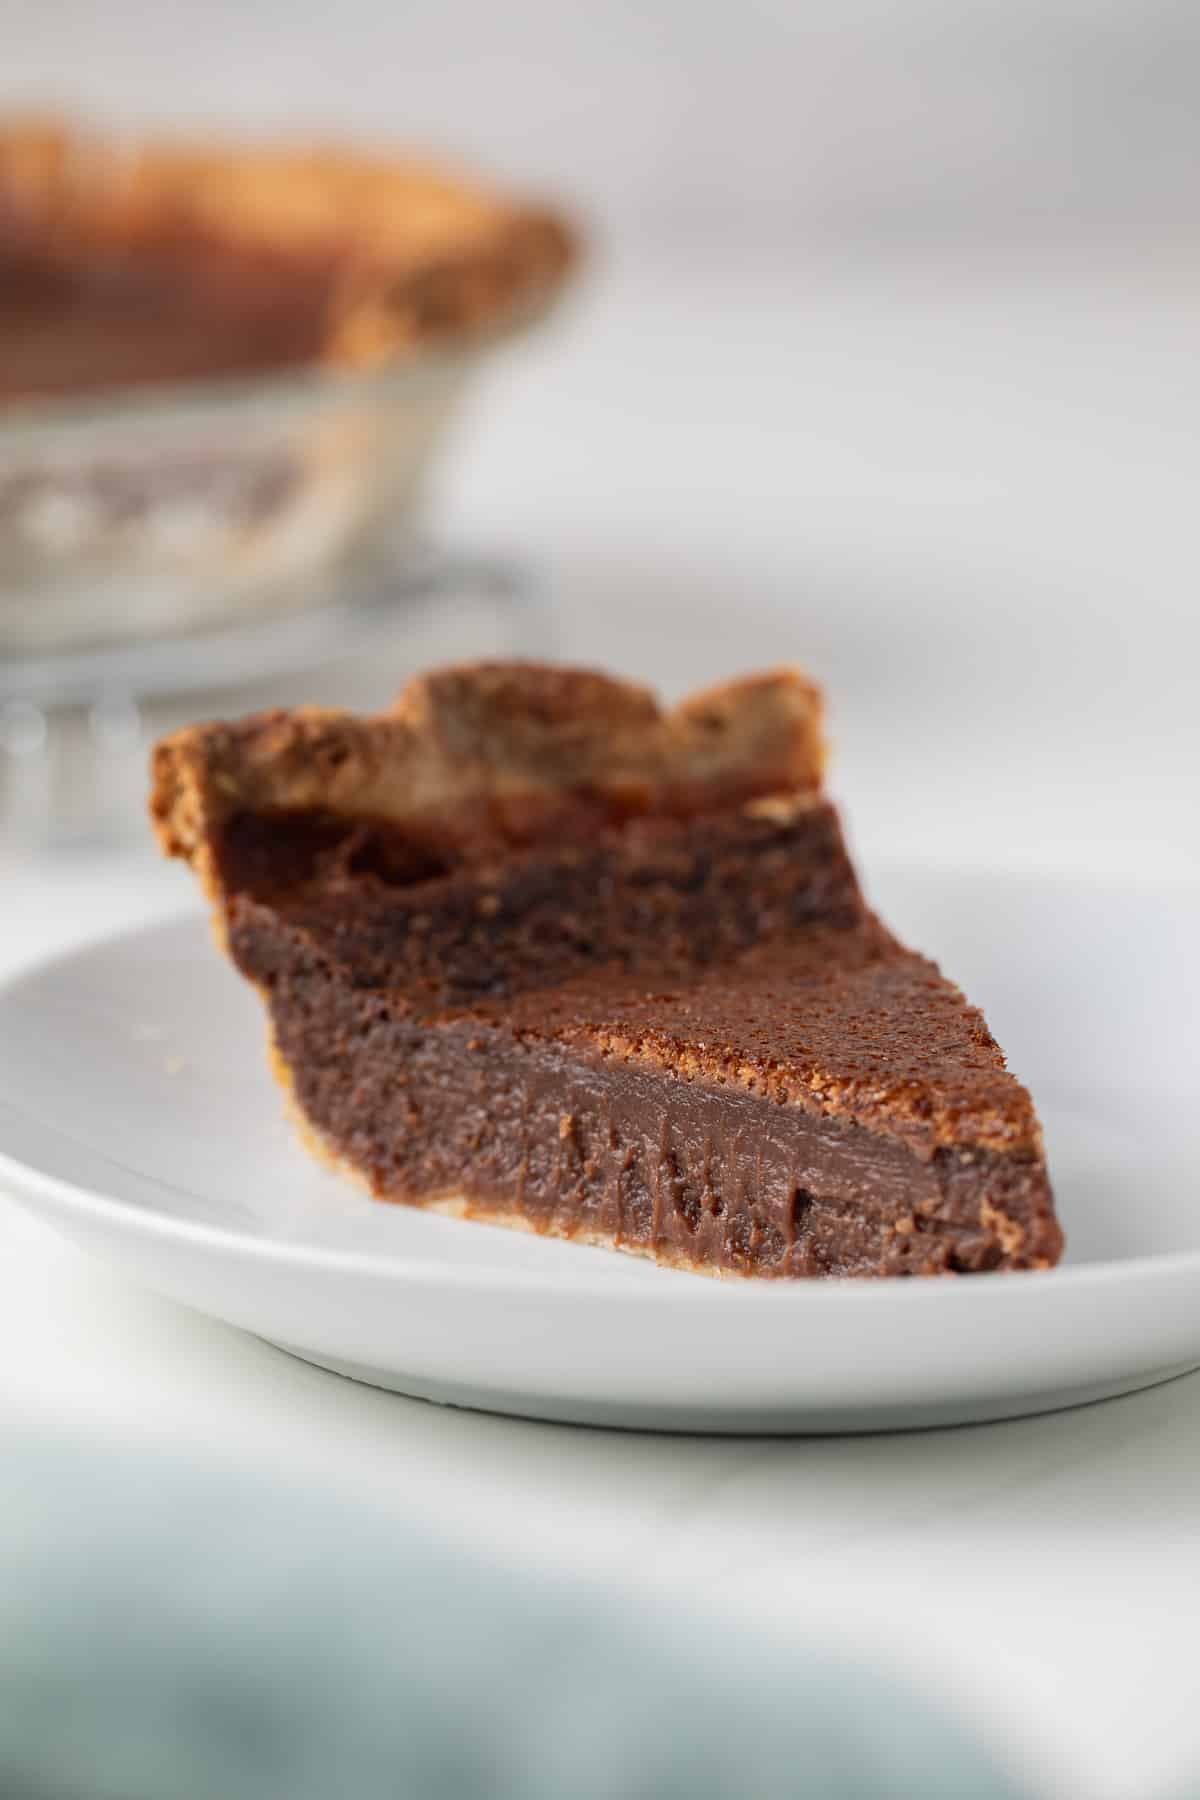 Side view of a slice of chocolate chess pie on white plate.